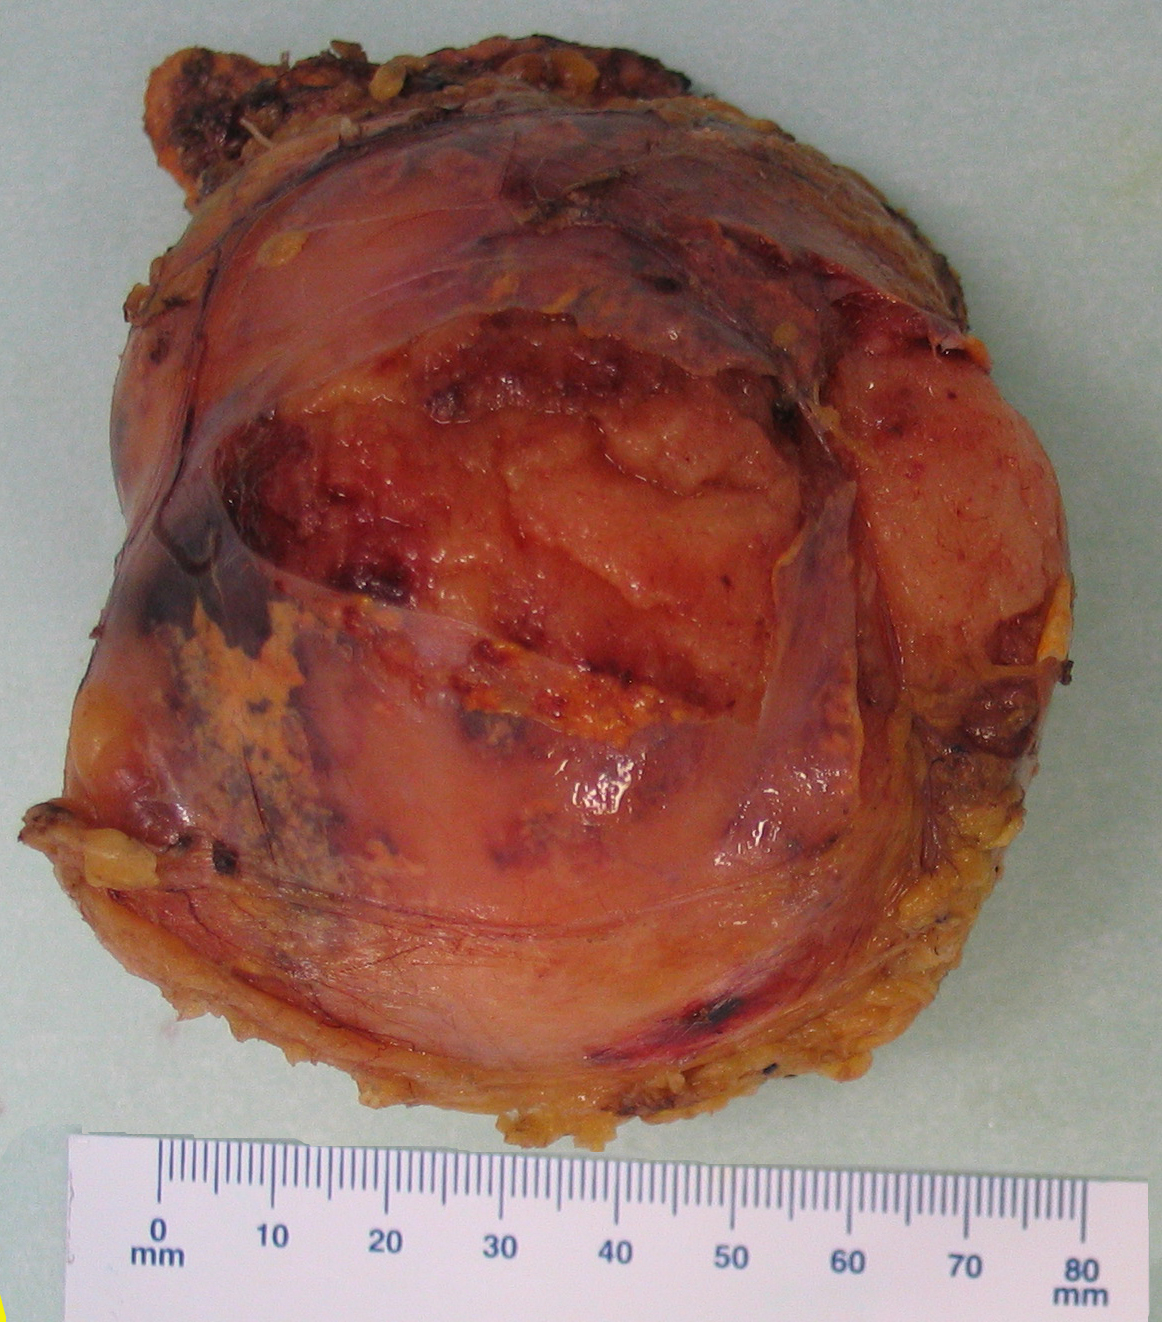 Myelolipoma gross pathology,source: By Mattopaedia - Own work, CC BY-SA 3.0, https://commons.wikimedia.org/w/index.php?curid=5668284